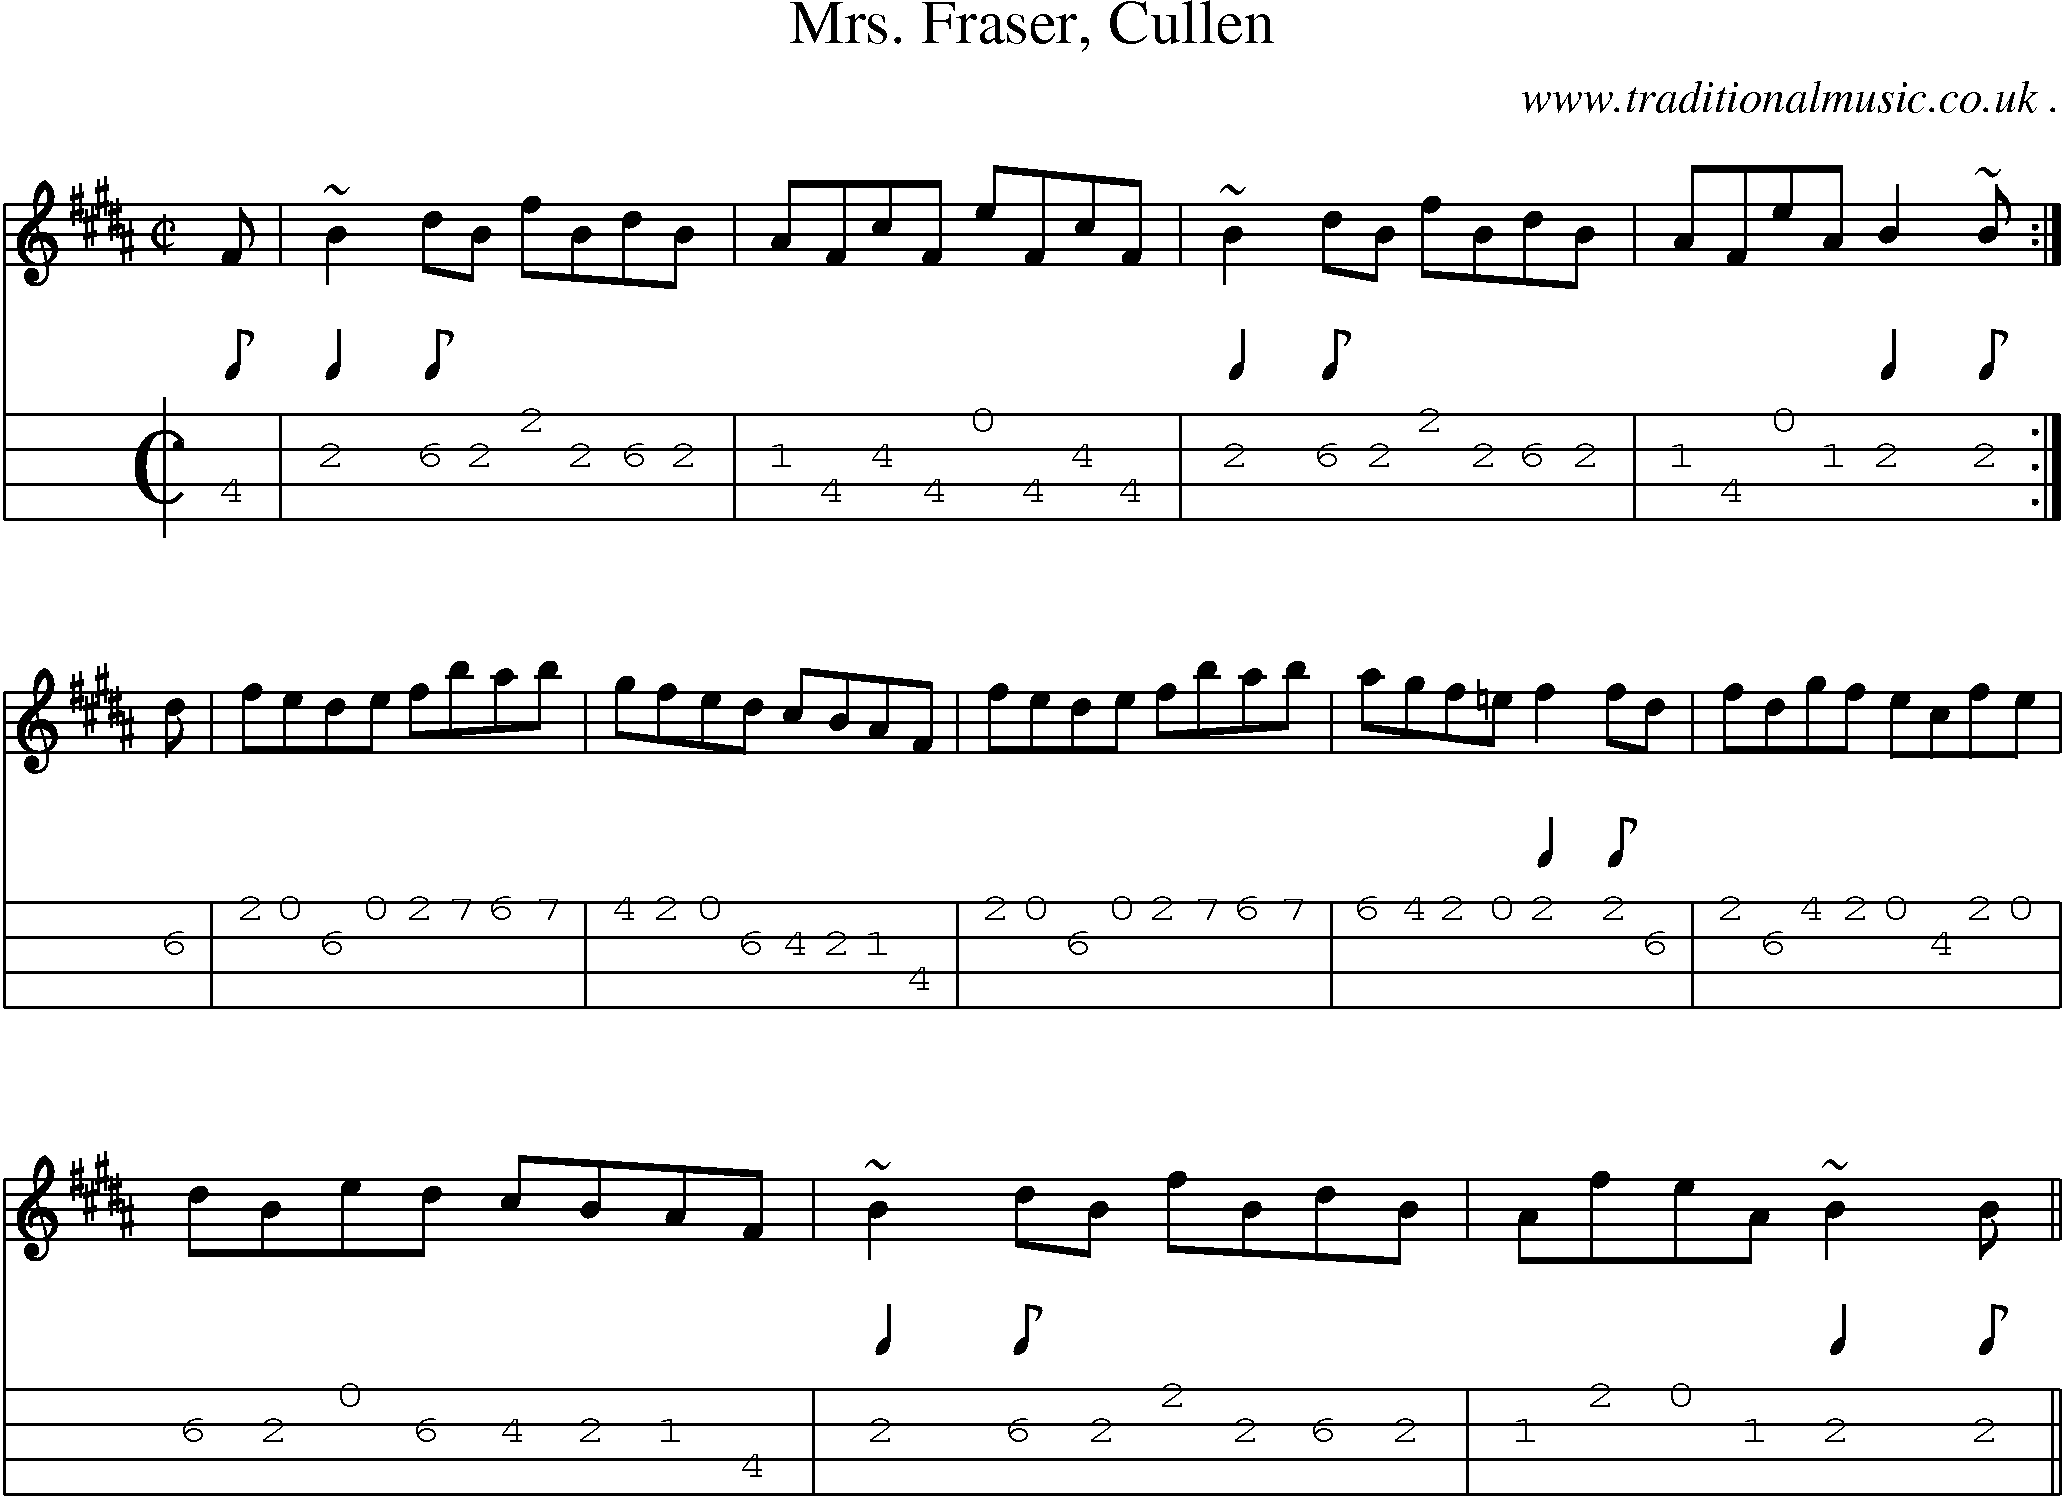 Sheet-music  score, Chords and Mandolin Tabs for Mrs Fraser Cullen